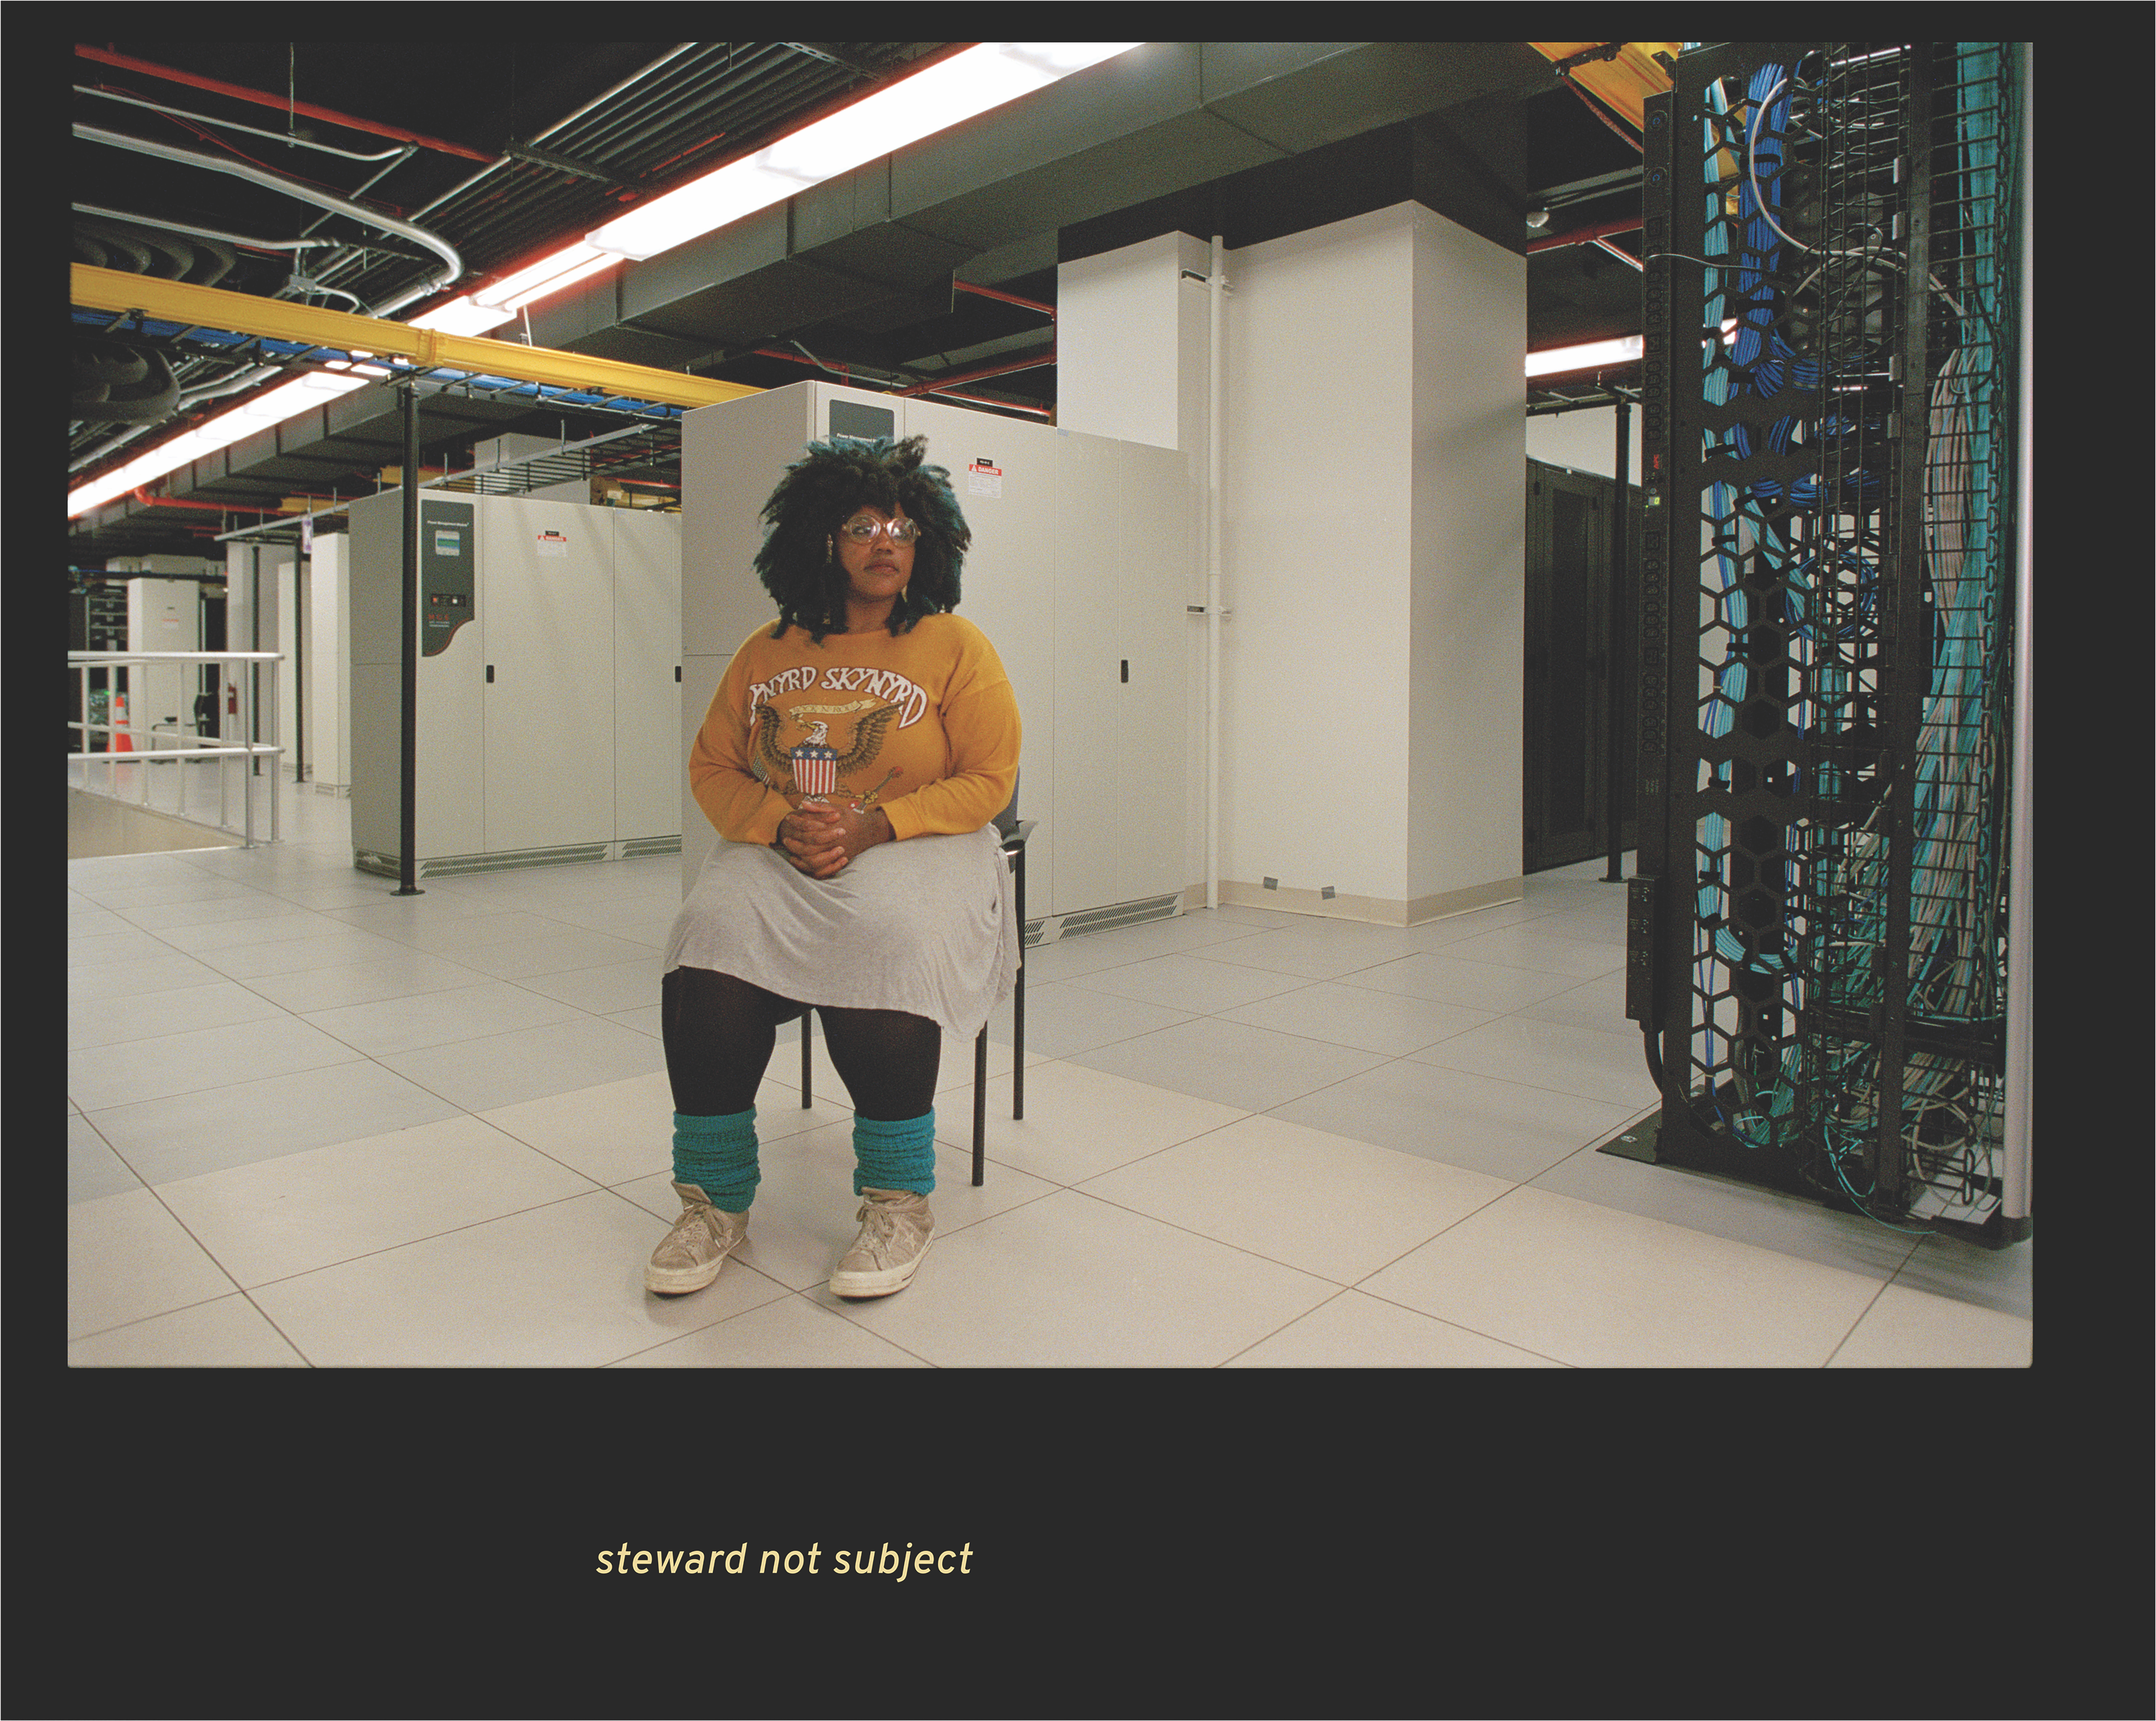 Black woman with black and blue hair sits in front of room holding electronics and metal cabinets with the caption “steward not subject”